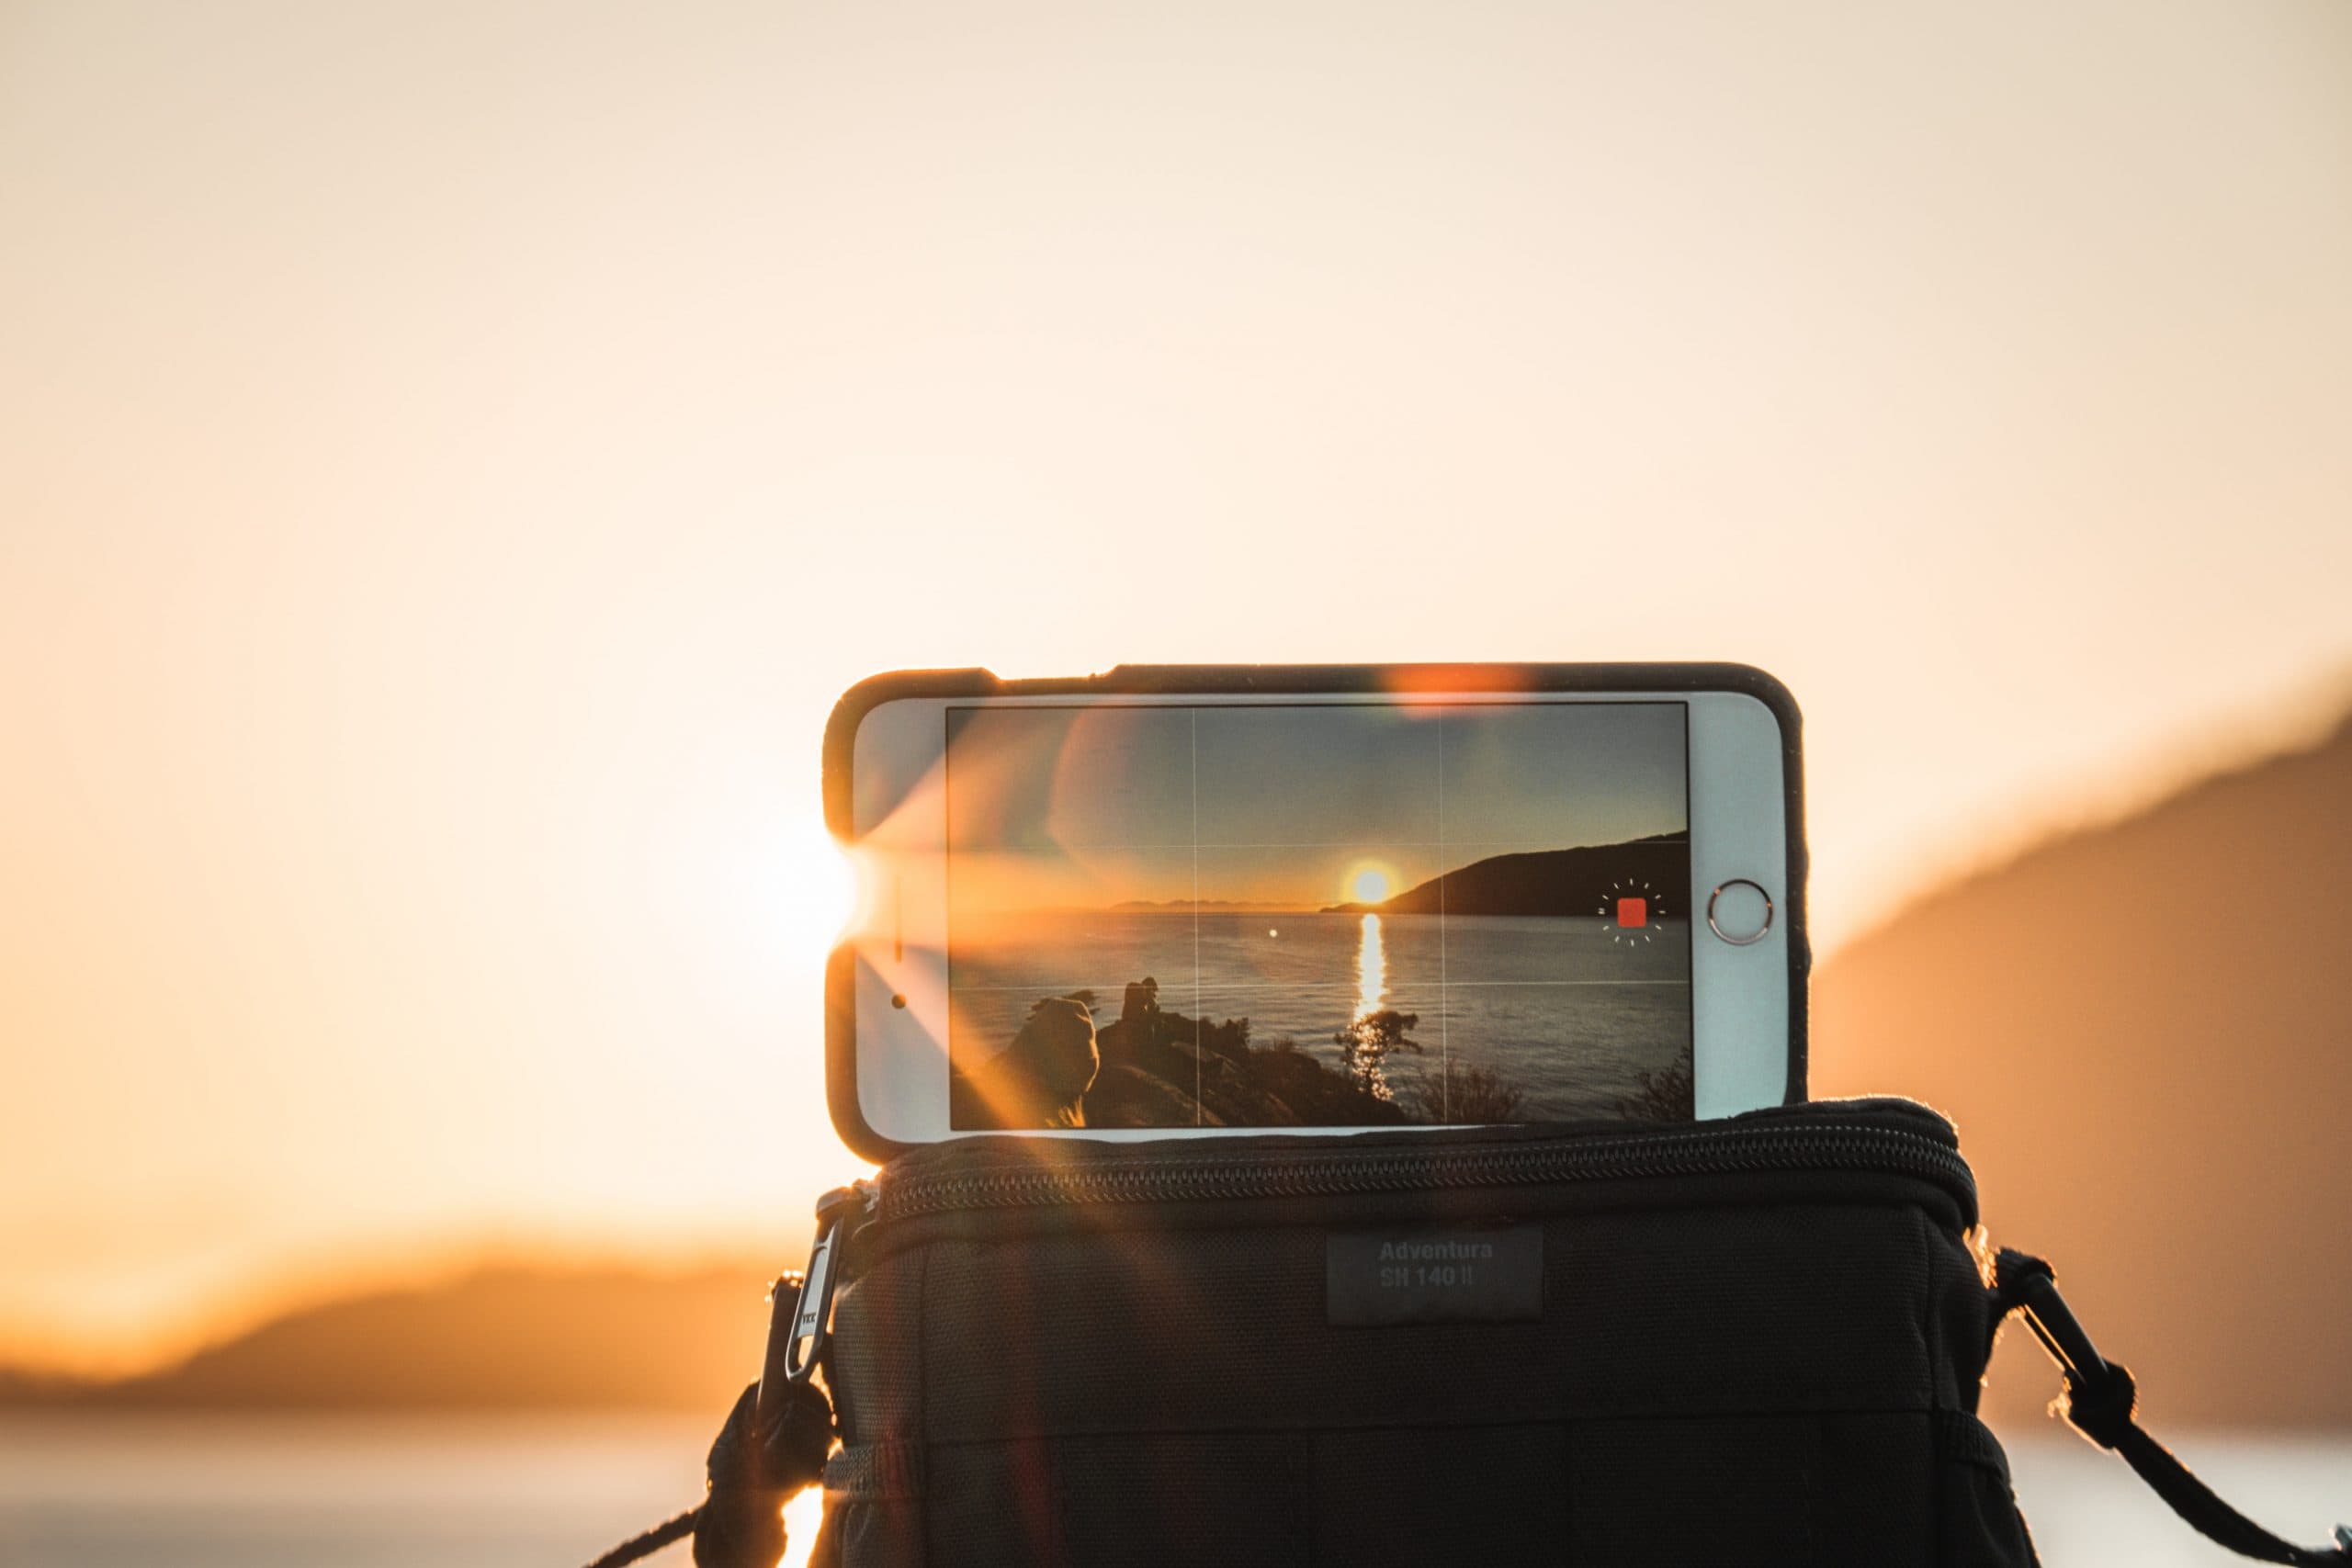 The Best Filmmaking Blogs in 2021 - An image of an iPhone filming a sunset